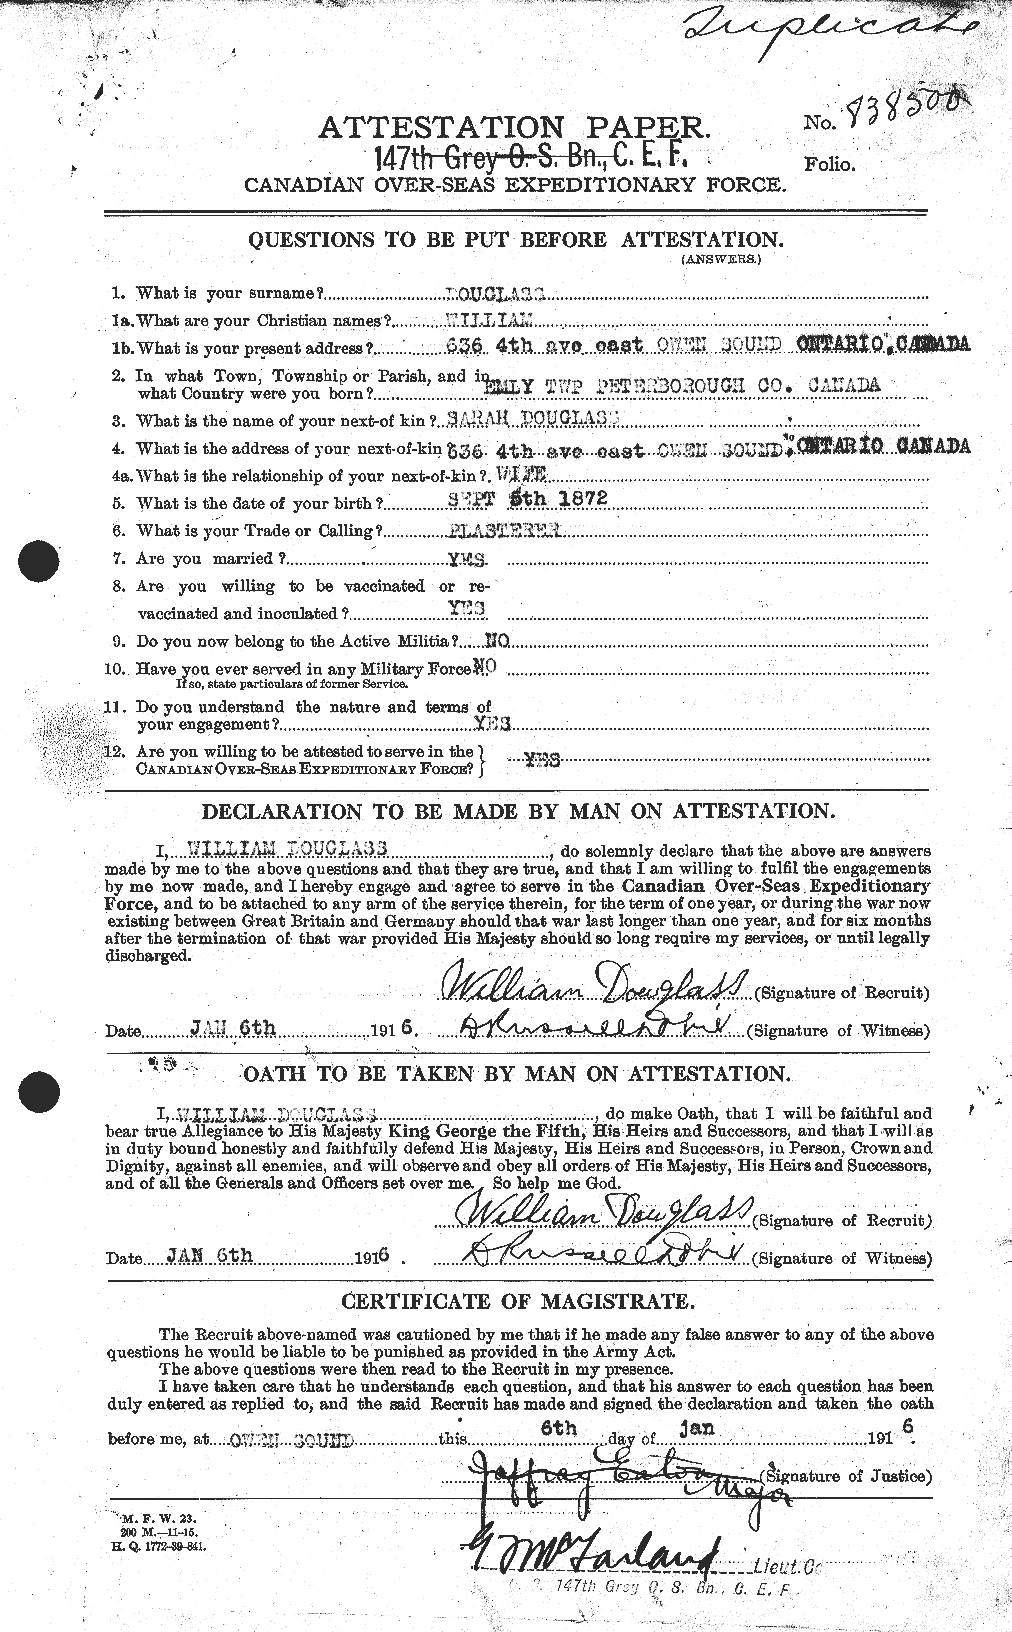 Personnel Records of the First World War - CEF 296832a